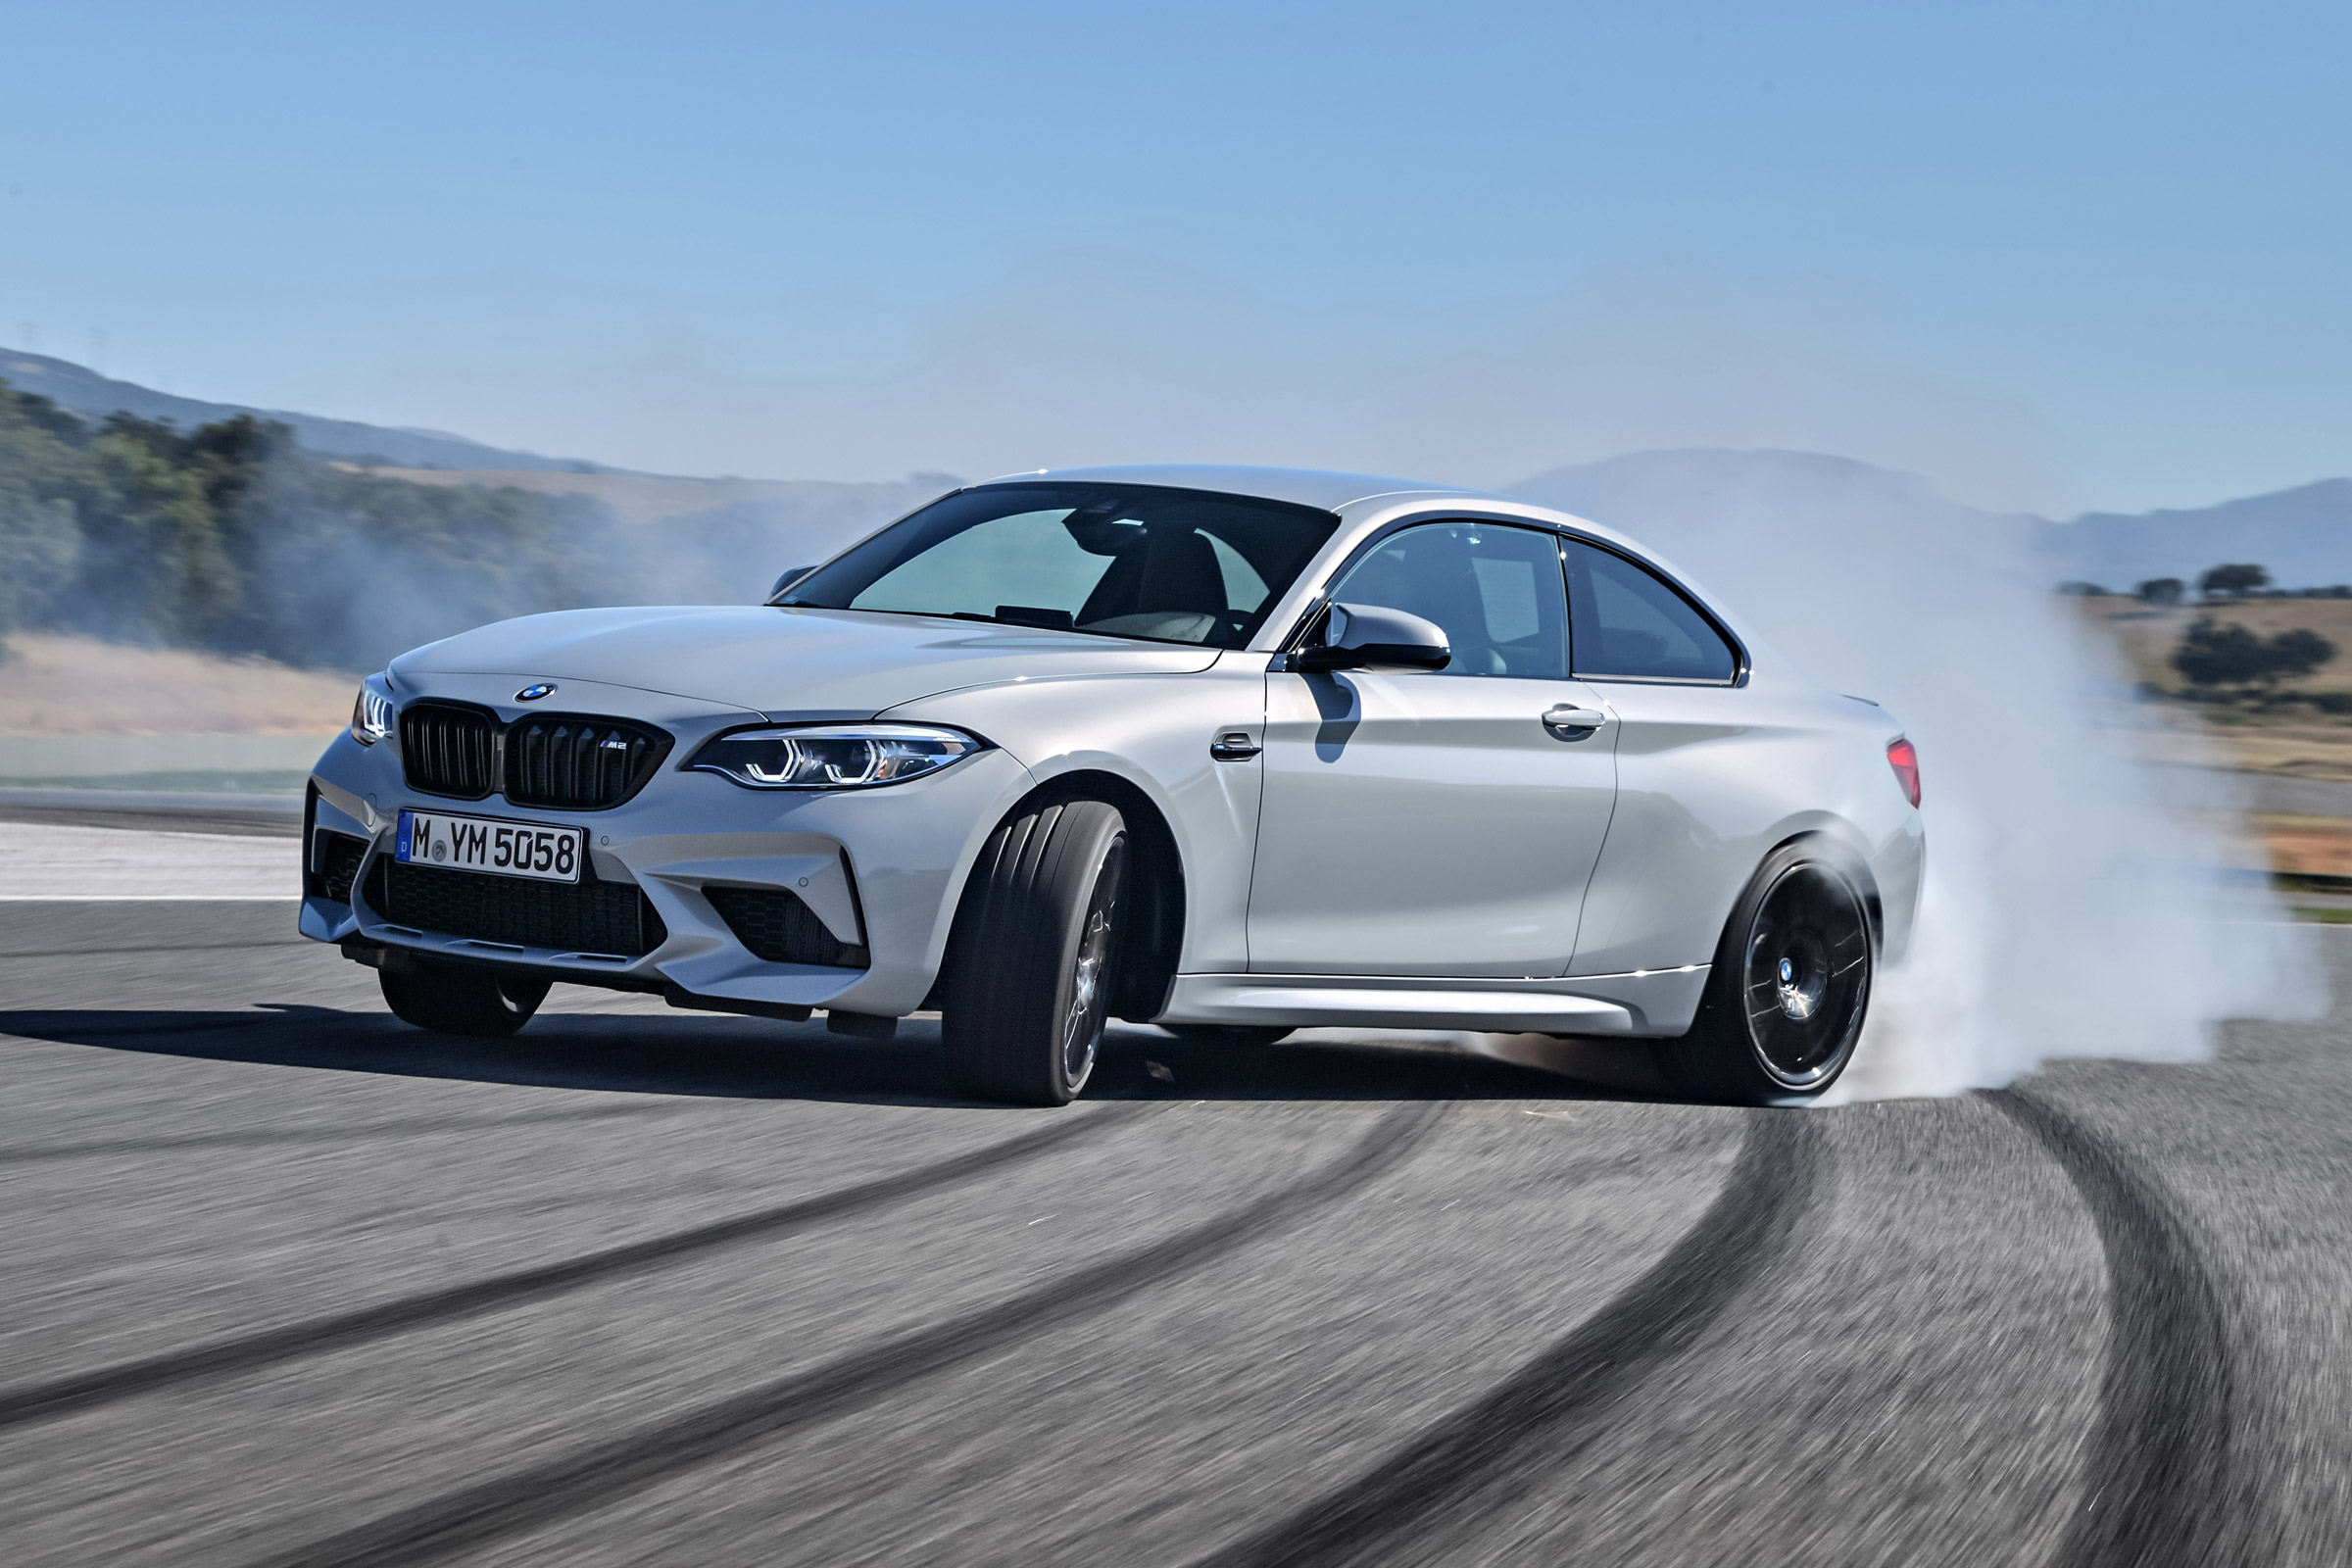 Bmw M2 Competition 2020 Review The M2 Raises Its Game In Real Style Evo